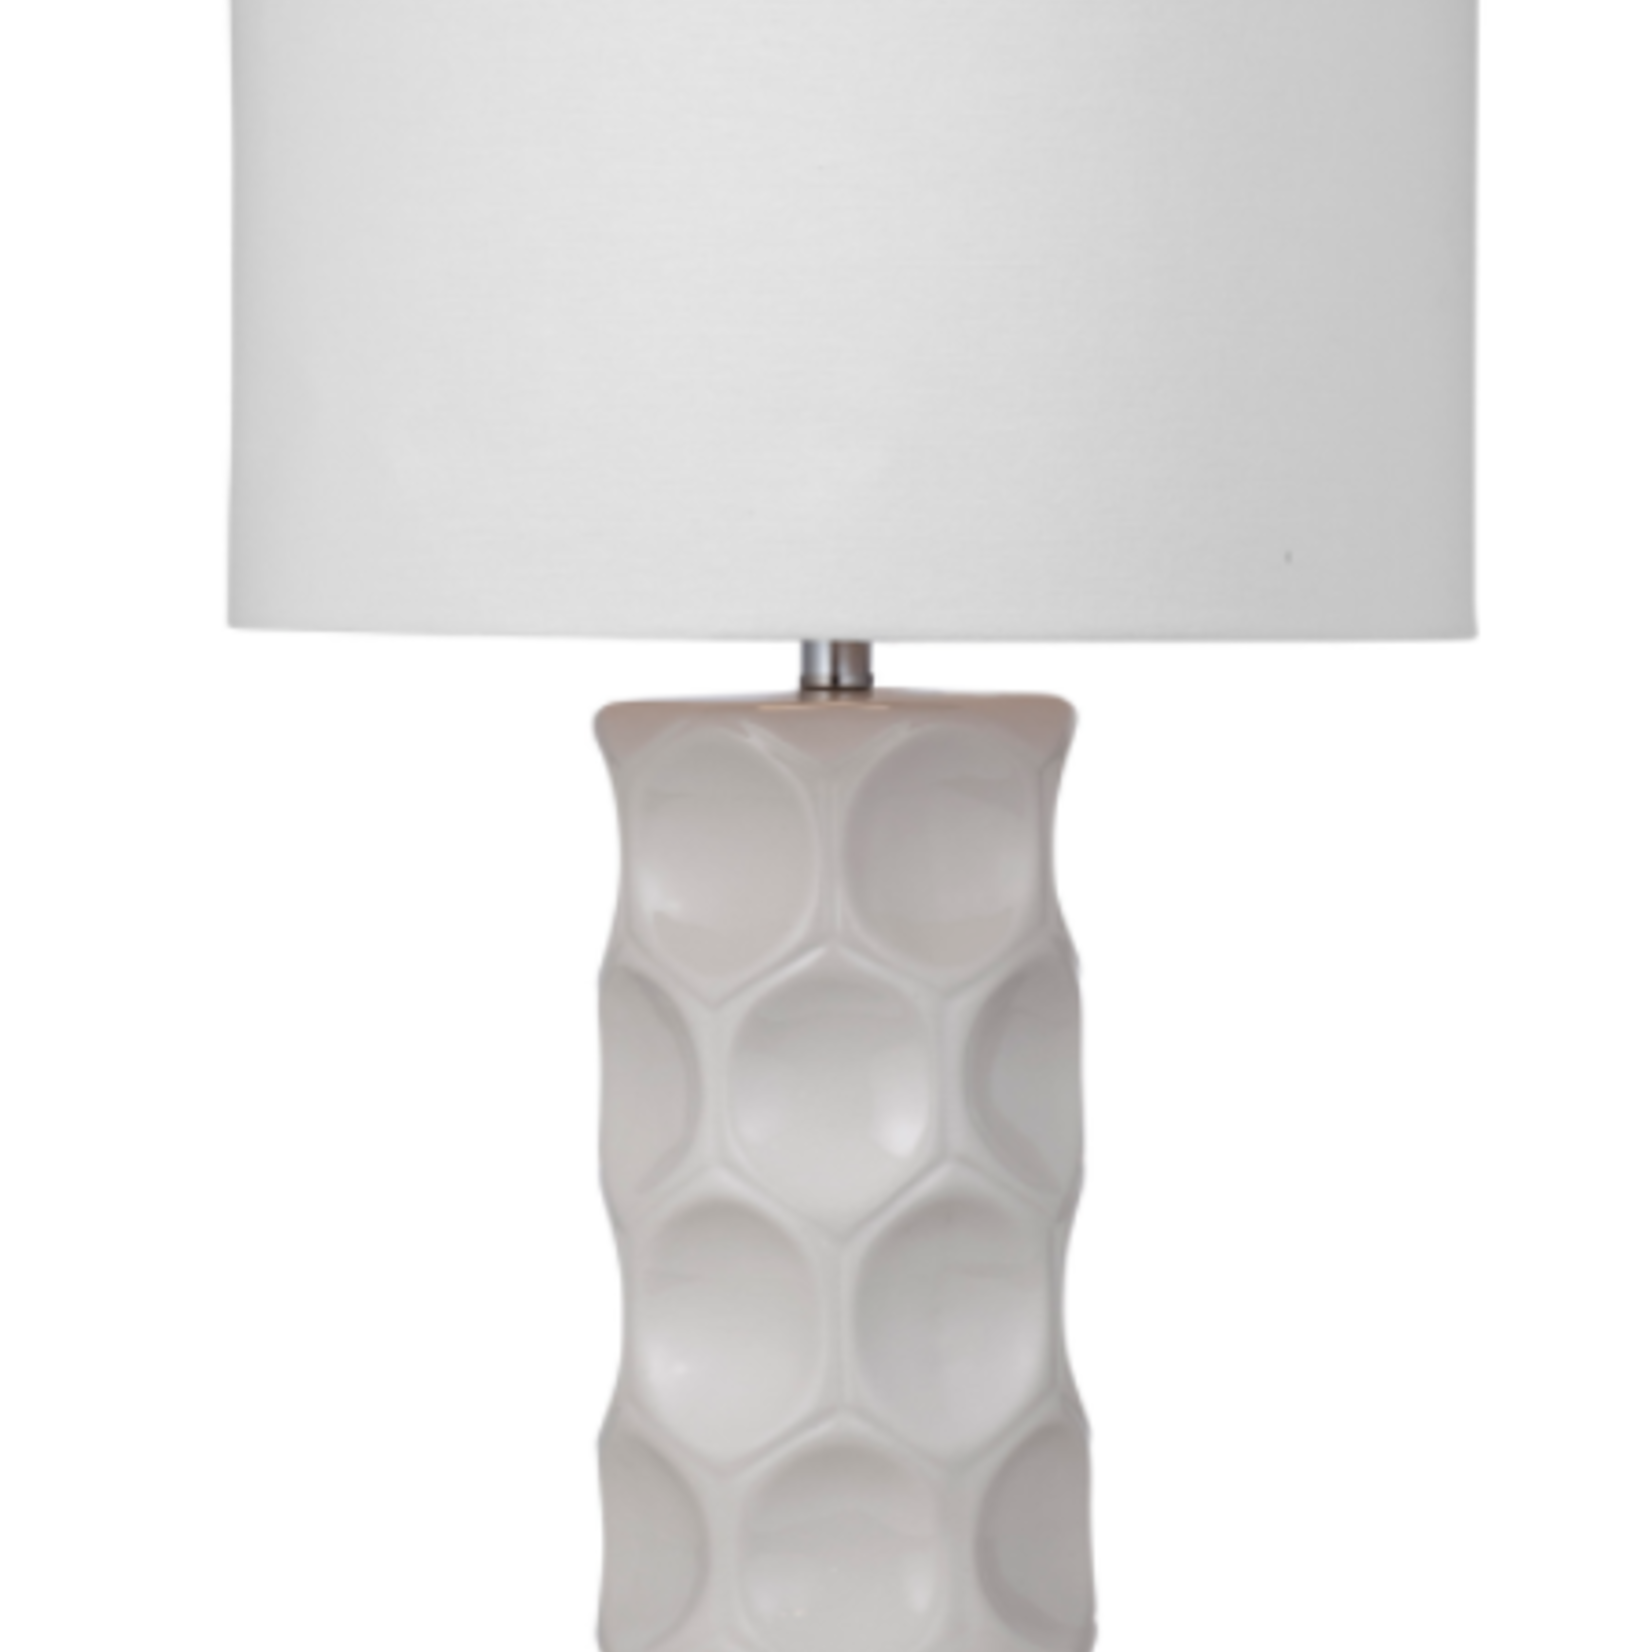 Cassidy Table Lamp